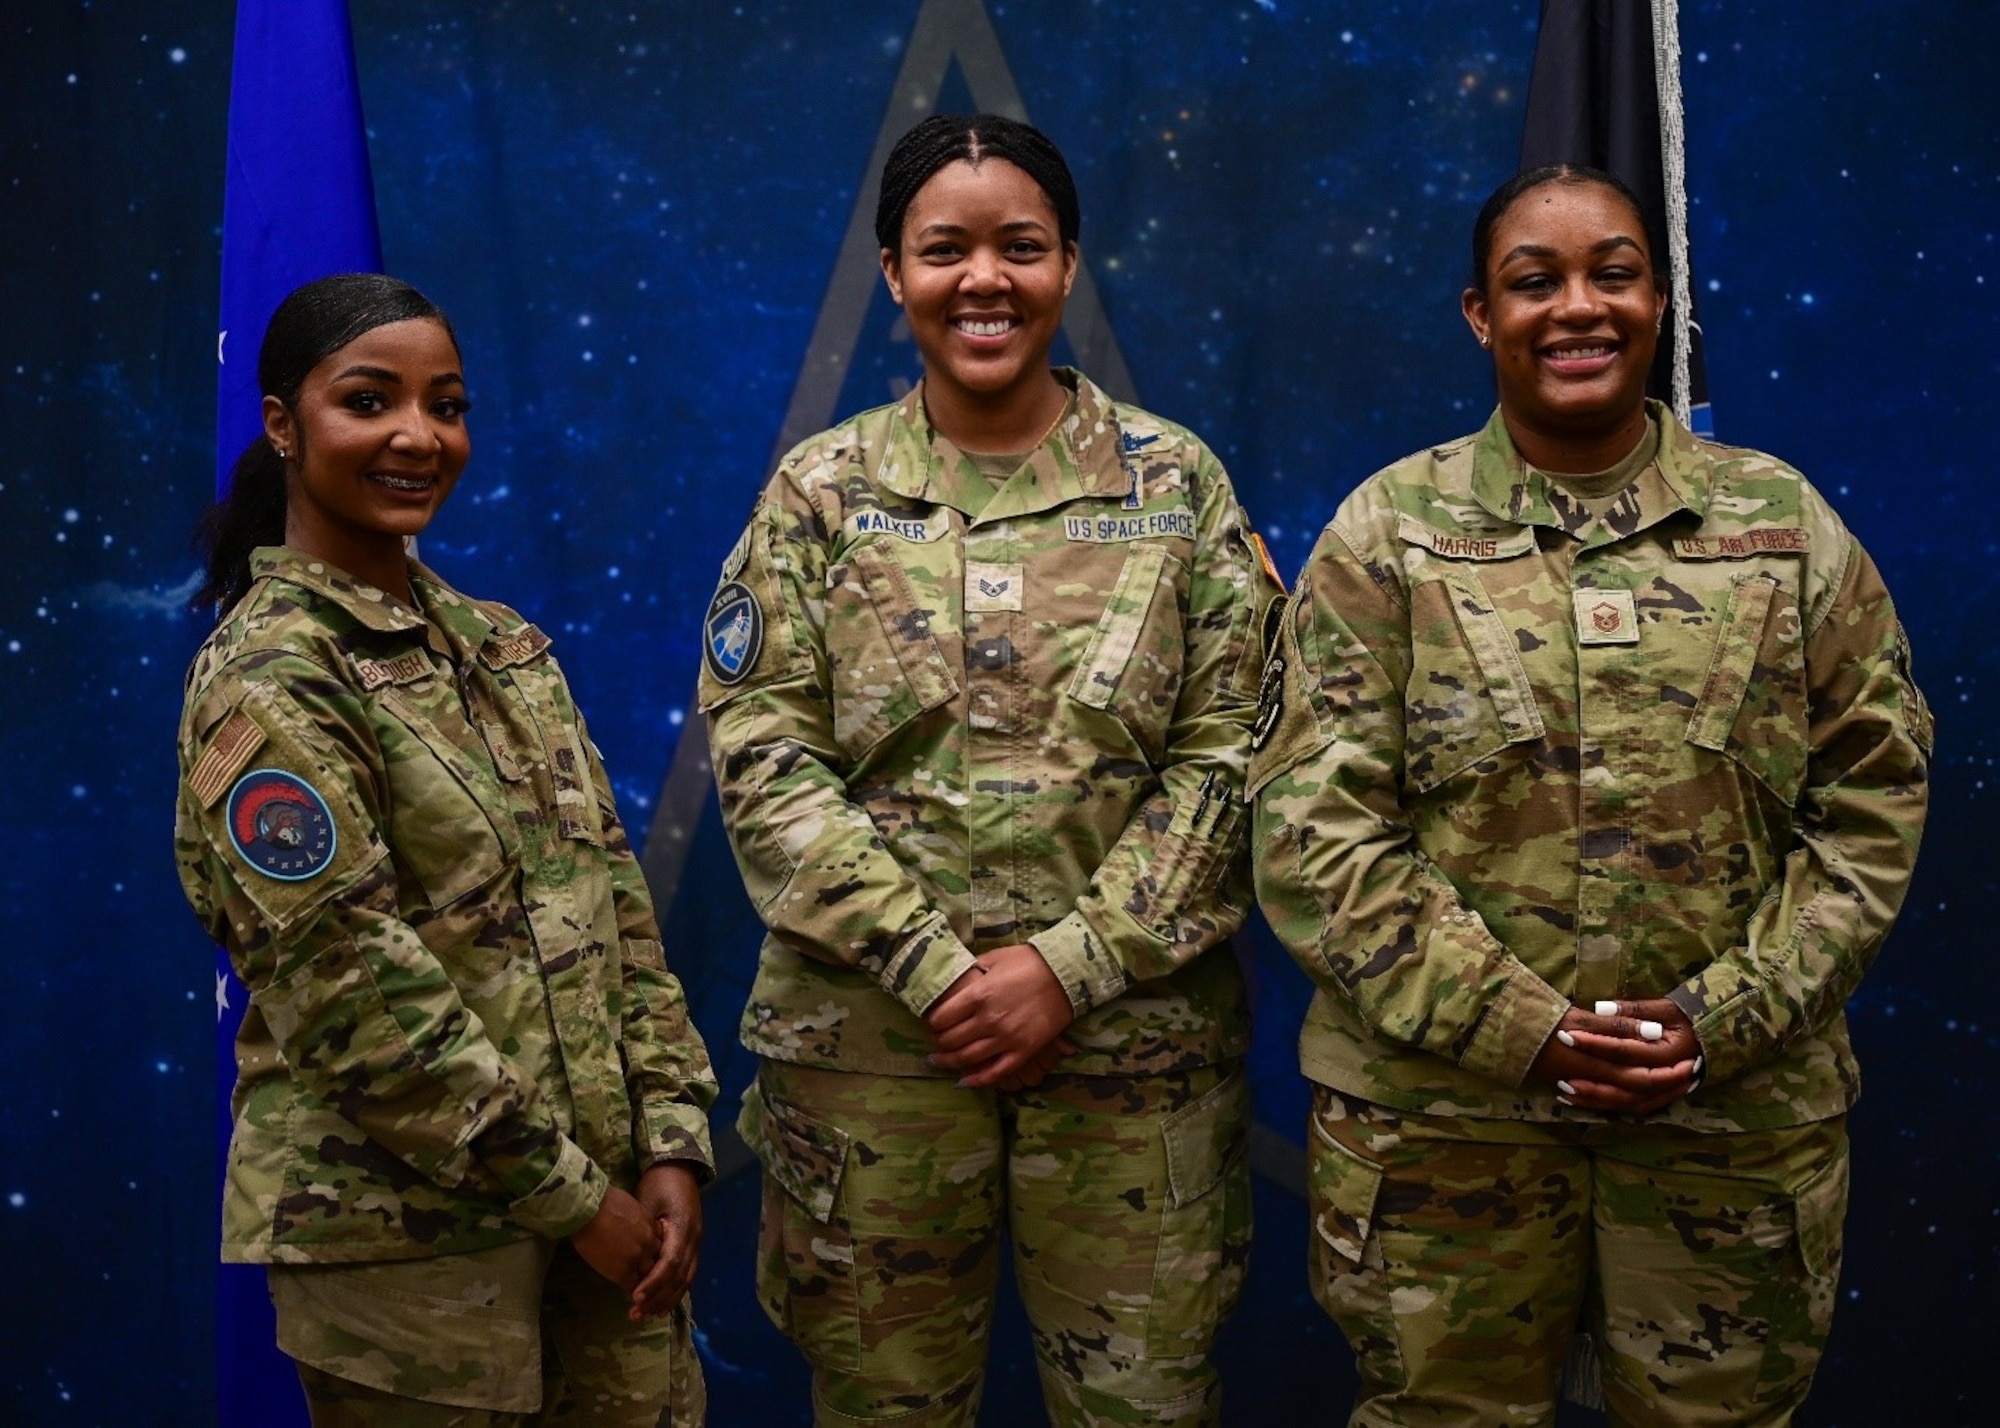 U.S. Air Force Senior Airman Debrincia Scarborough, 533rd Training Squadron commander support staff, U.S. Space Force Sgt. Kendra Walker, 18th Space Defense Squadron crew chief, and U.S. Air Force Master Sgt. Latrice Harris, 30th Logistical Readiness Squadron superintendent, pose for a photo on Vandenberg Space Force Base, Calif., June 29, 2023. The three Vandenberg Space Force Base service members applied their training in Tactical Combat Casualty Care to aid a man attempting to take his own life in Santa Maria, Calif., on May 20, 2023. (U.S. Space Force photo by 2nd Lt. Hunter Lavigne.)